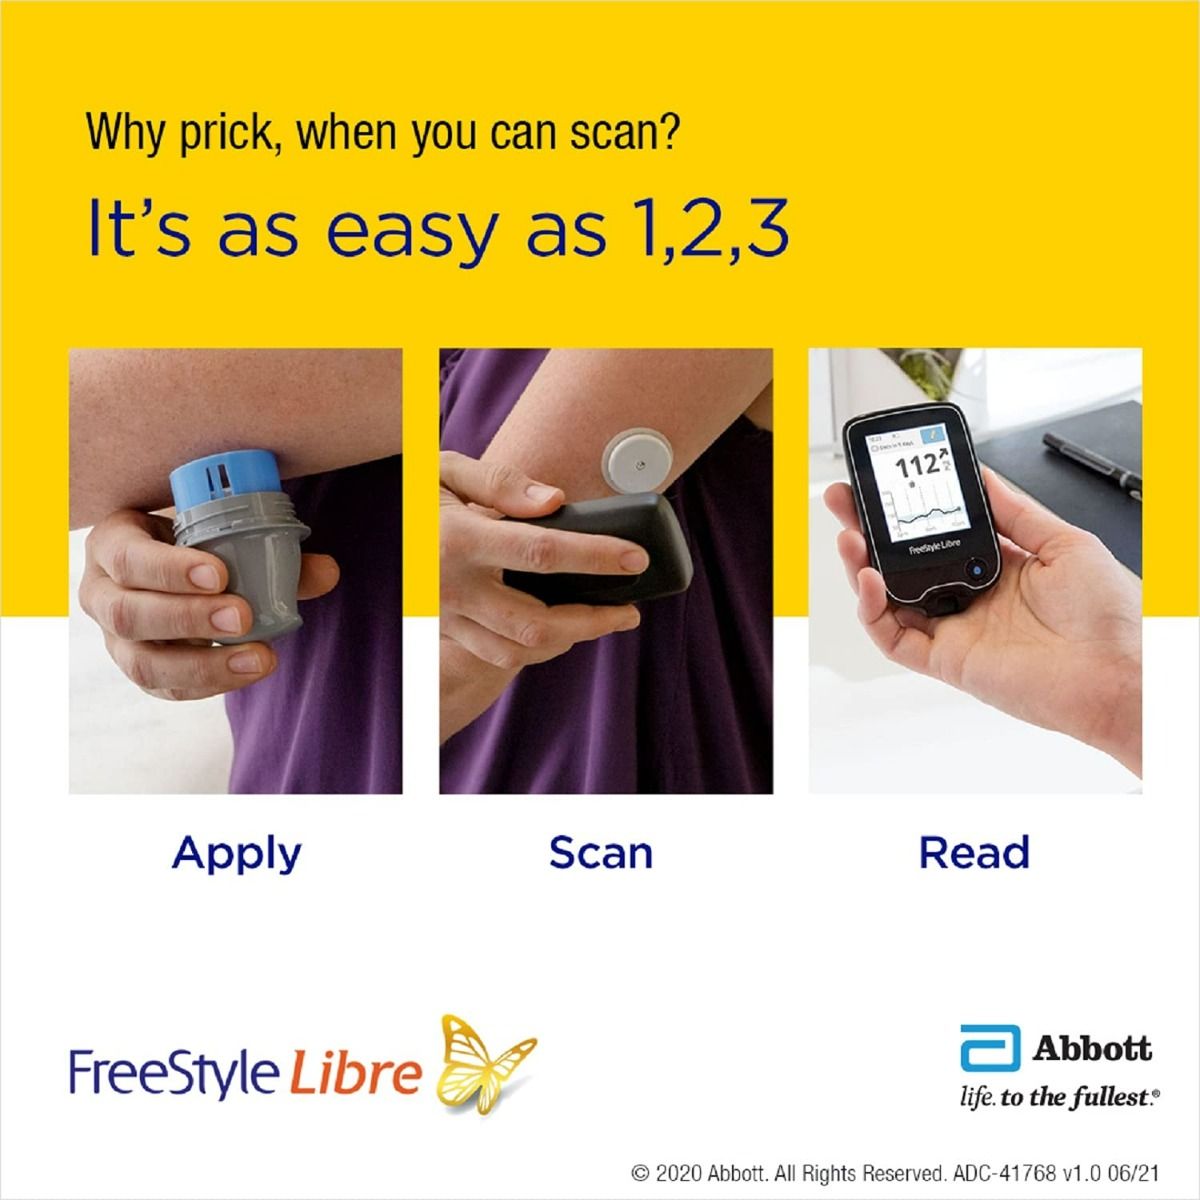 FreeStyle Libre Sensor - Flash Glucose Monitoring System, 1 Count, Pack of 1 